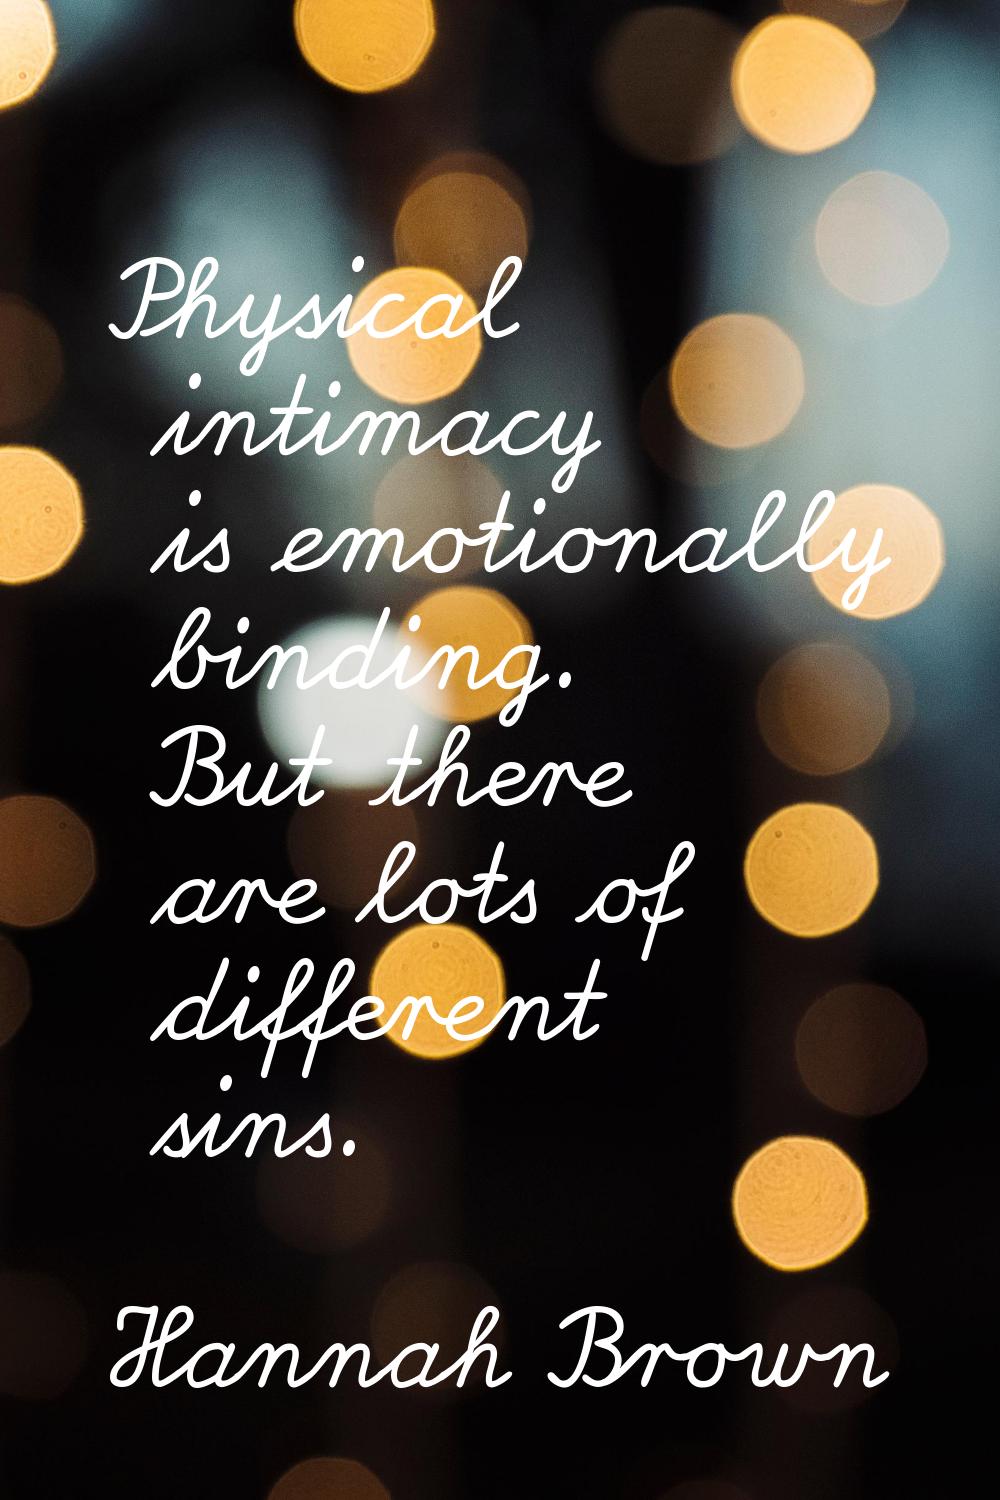 Physical intimacy is emotionally binding. But there are lots of different sins.